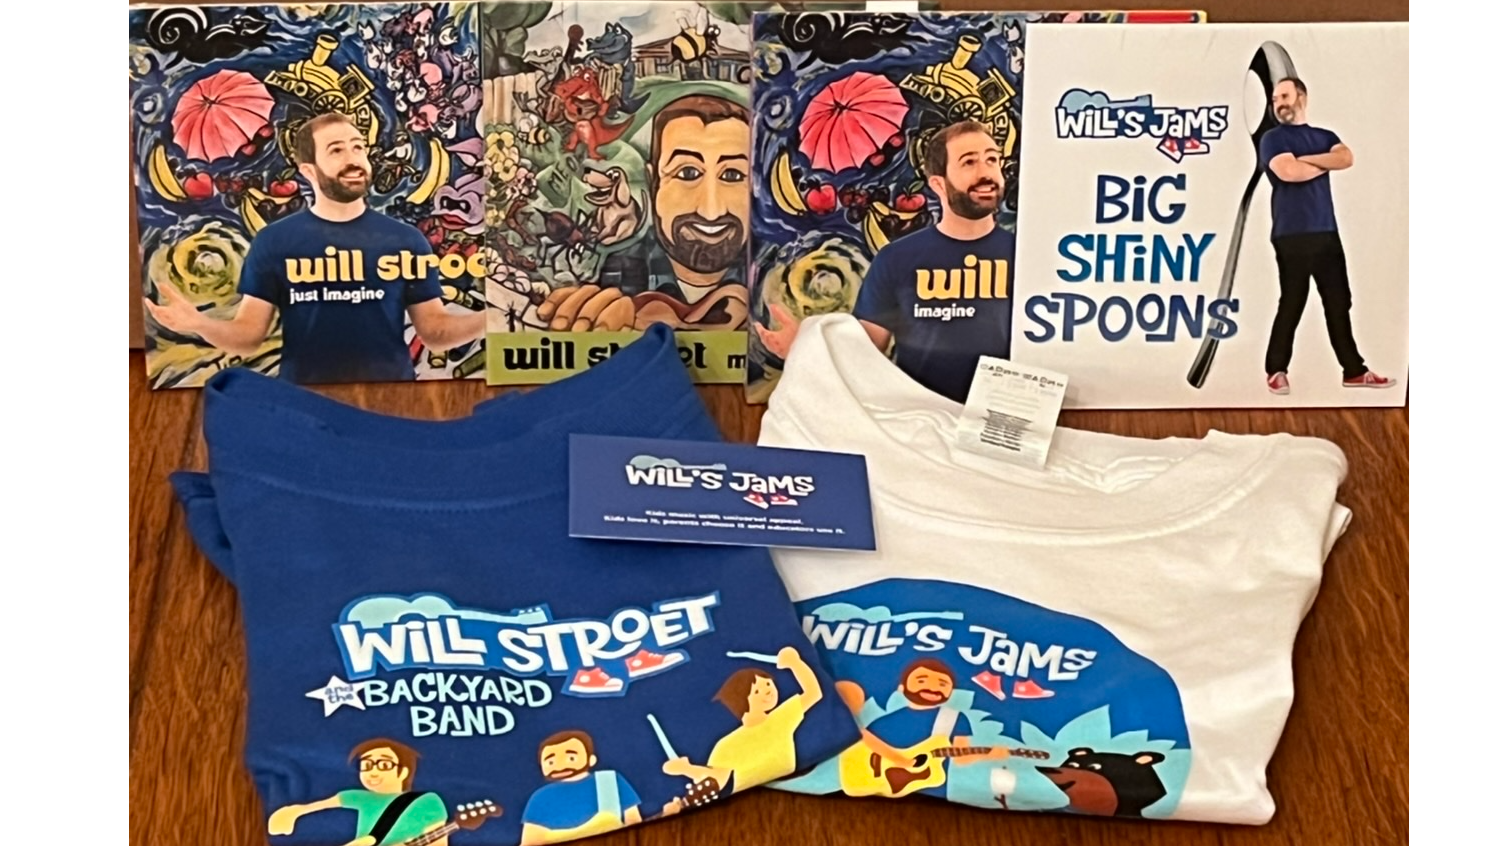 4 CDs and 2 T-shirts for Will's Jams